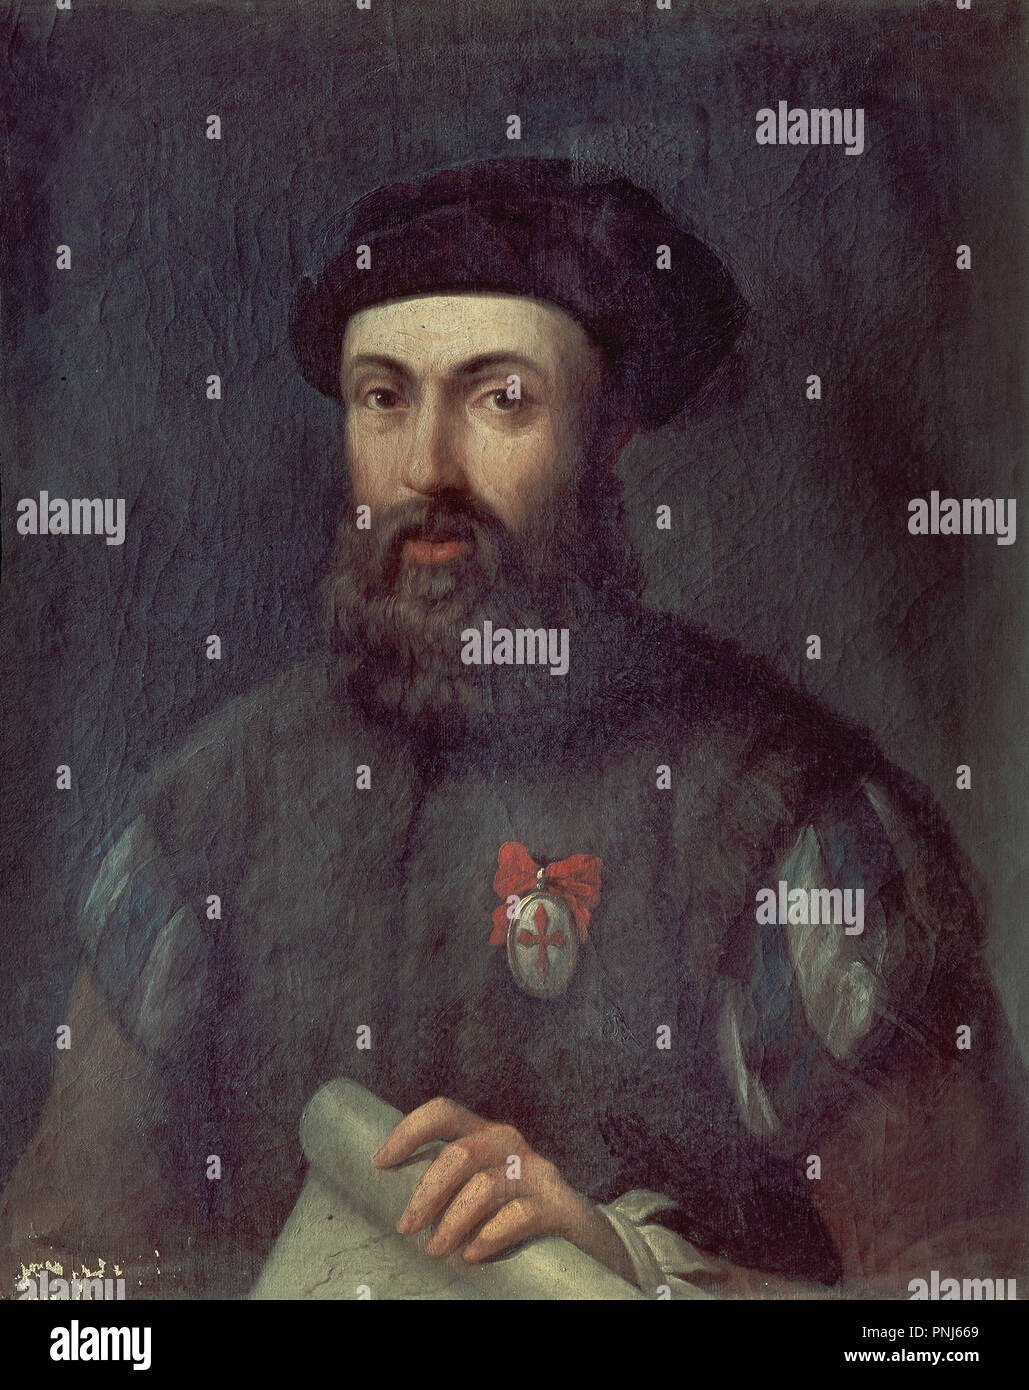 Ferdinand Magellan (1480-1521). Oil on canvas (72 x 61 cm). Reproduced in 1848 from a 16th century painting. Madrid, naval museum. Author: ANONIMO SIGLO XVI. Location: MUSEO NAVAL / MINISTERIO DE MARINA. MADRID. SPAIN. Stock Photo